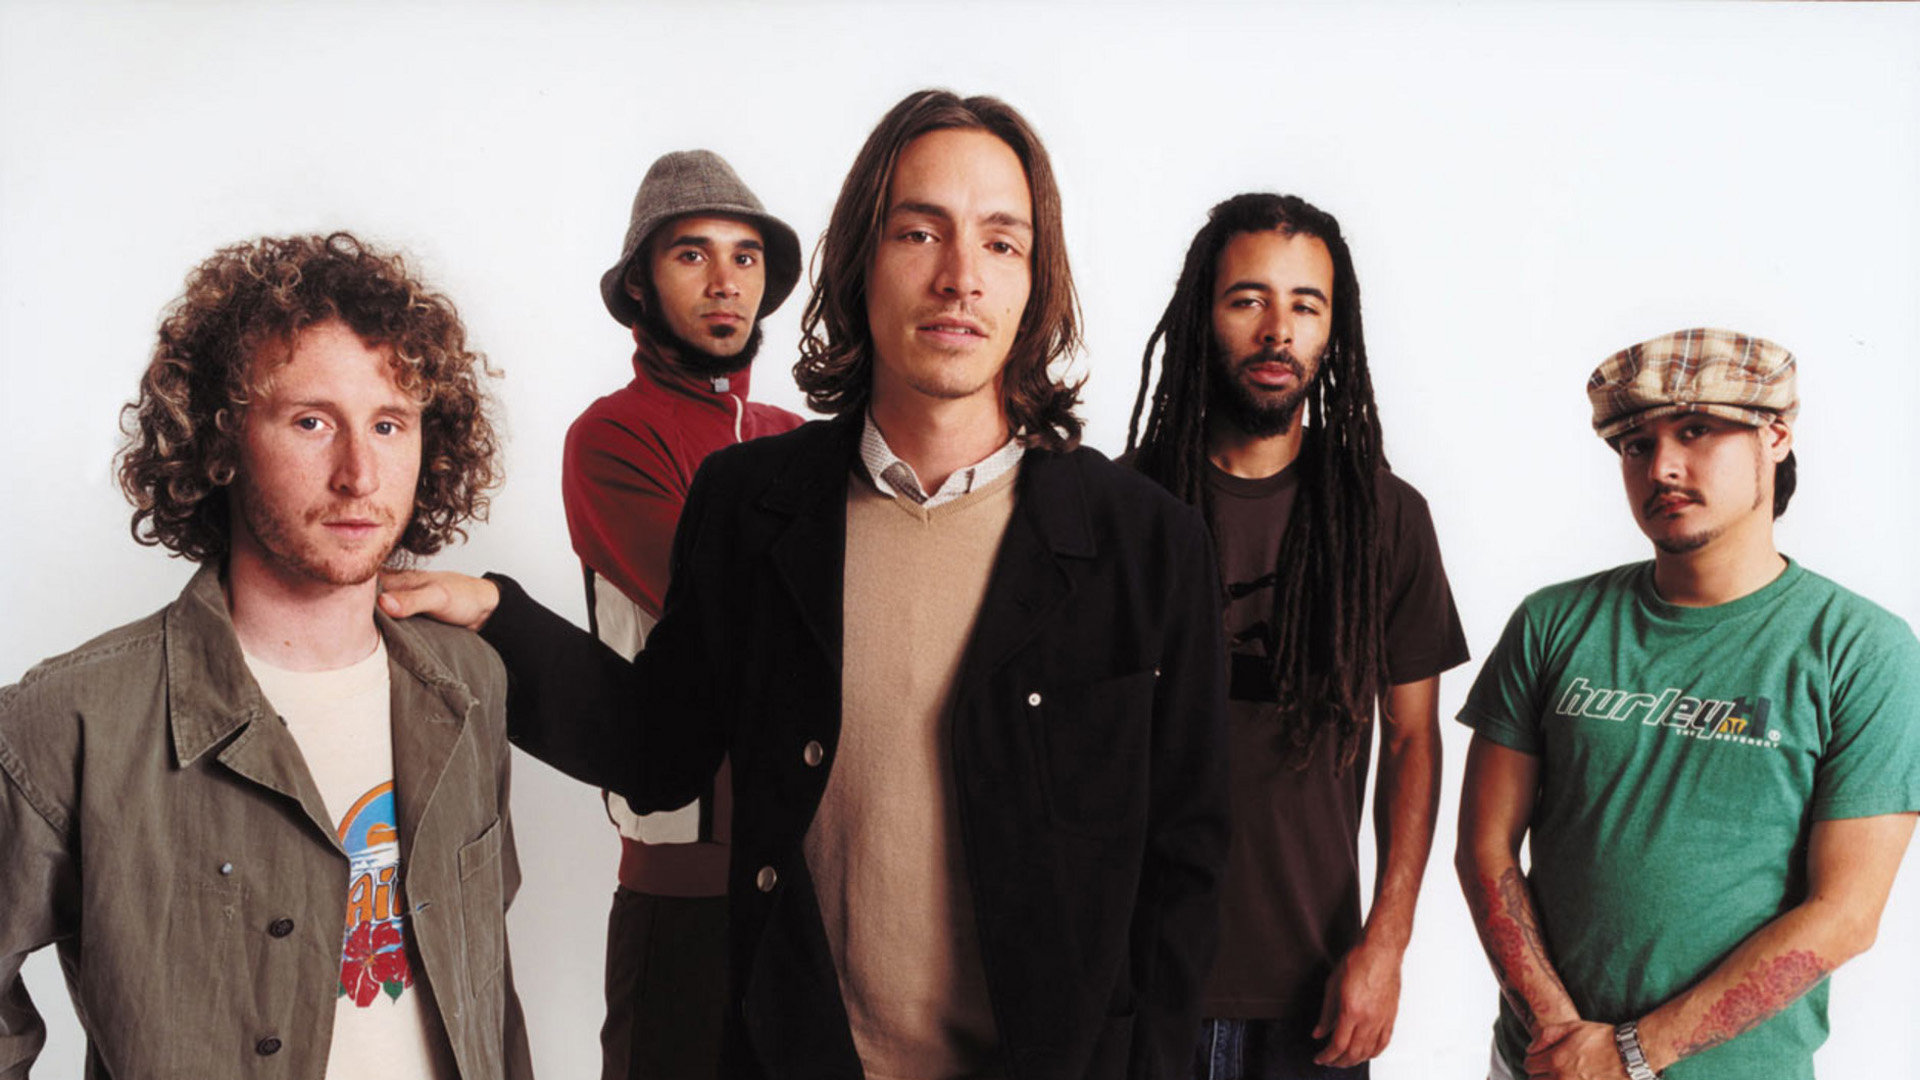 Download full hd 1920x1080 Incubus computer wallpaper ID:158370 for free